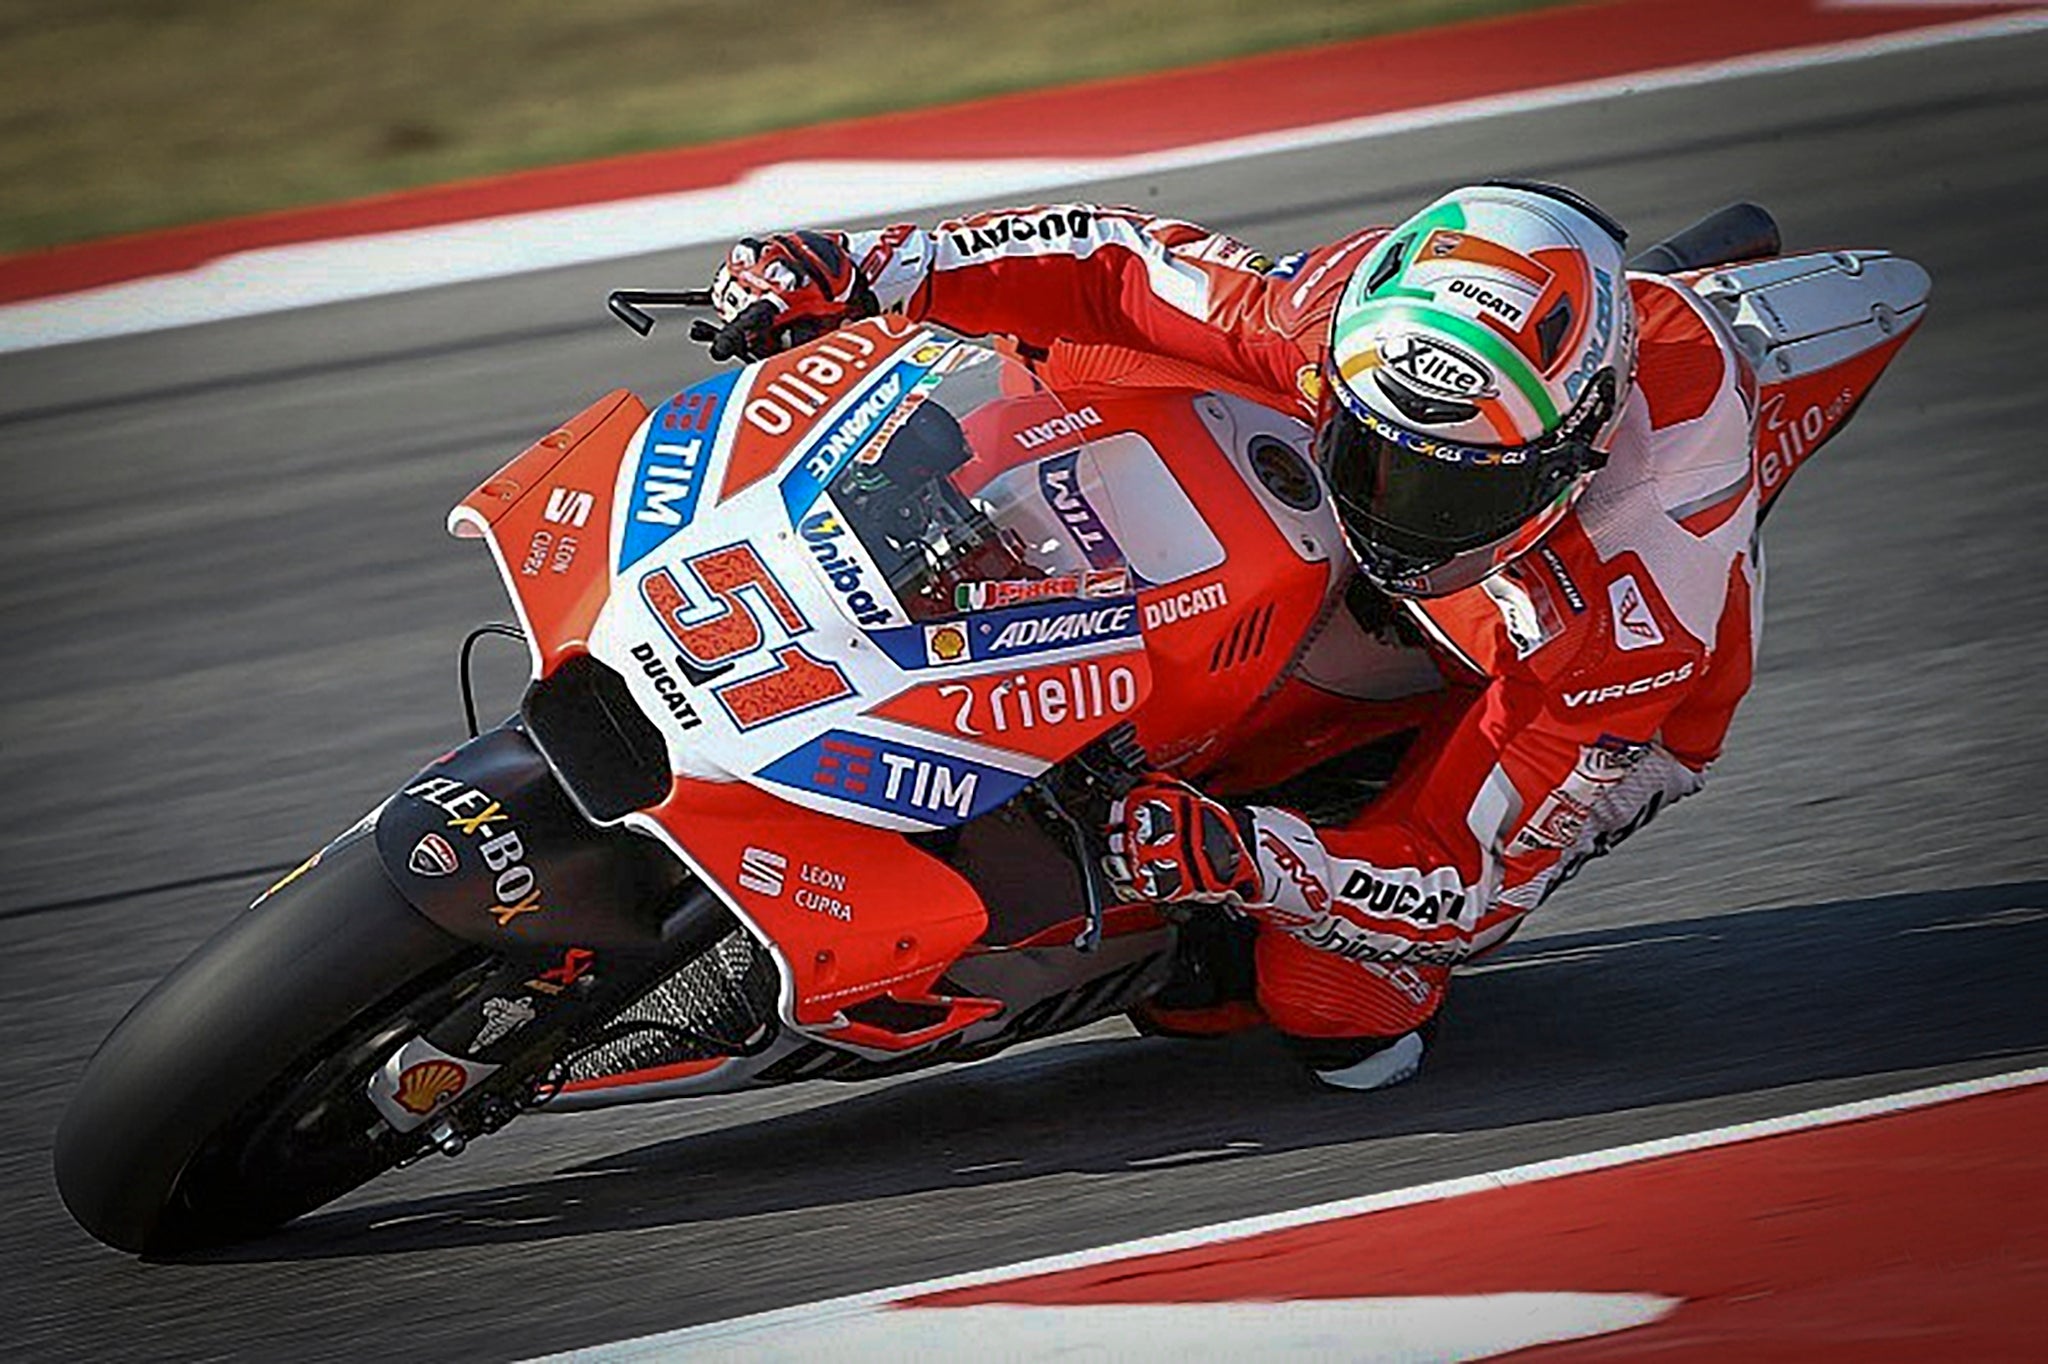 Michele Pirro on Ducati at the MotoGP